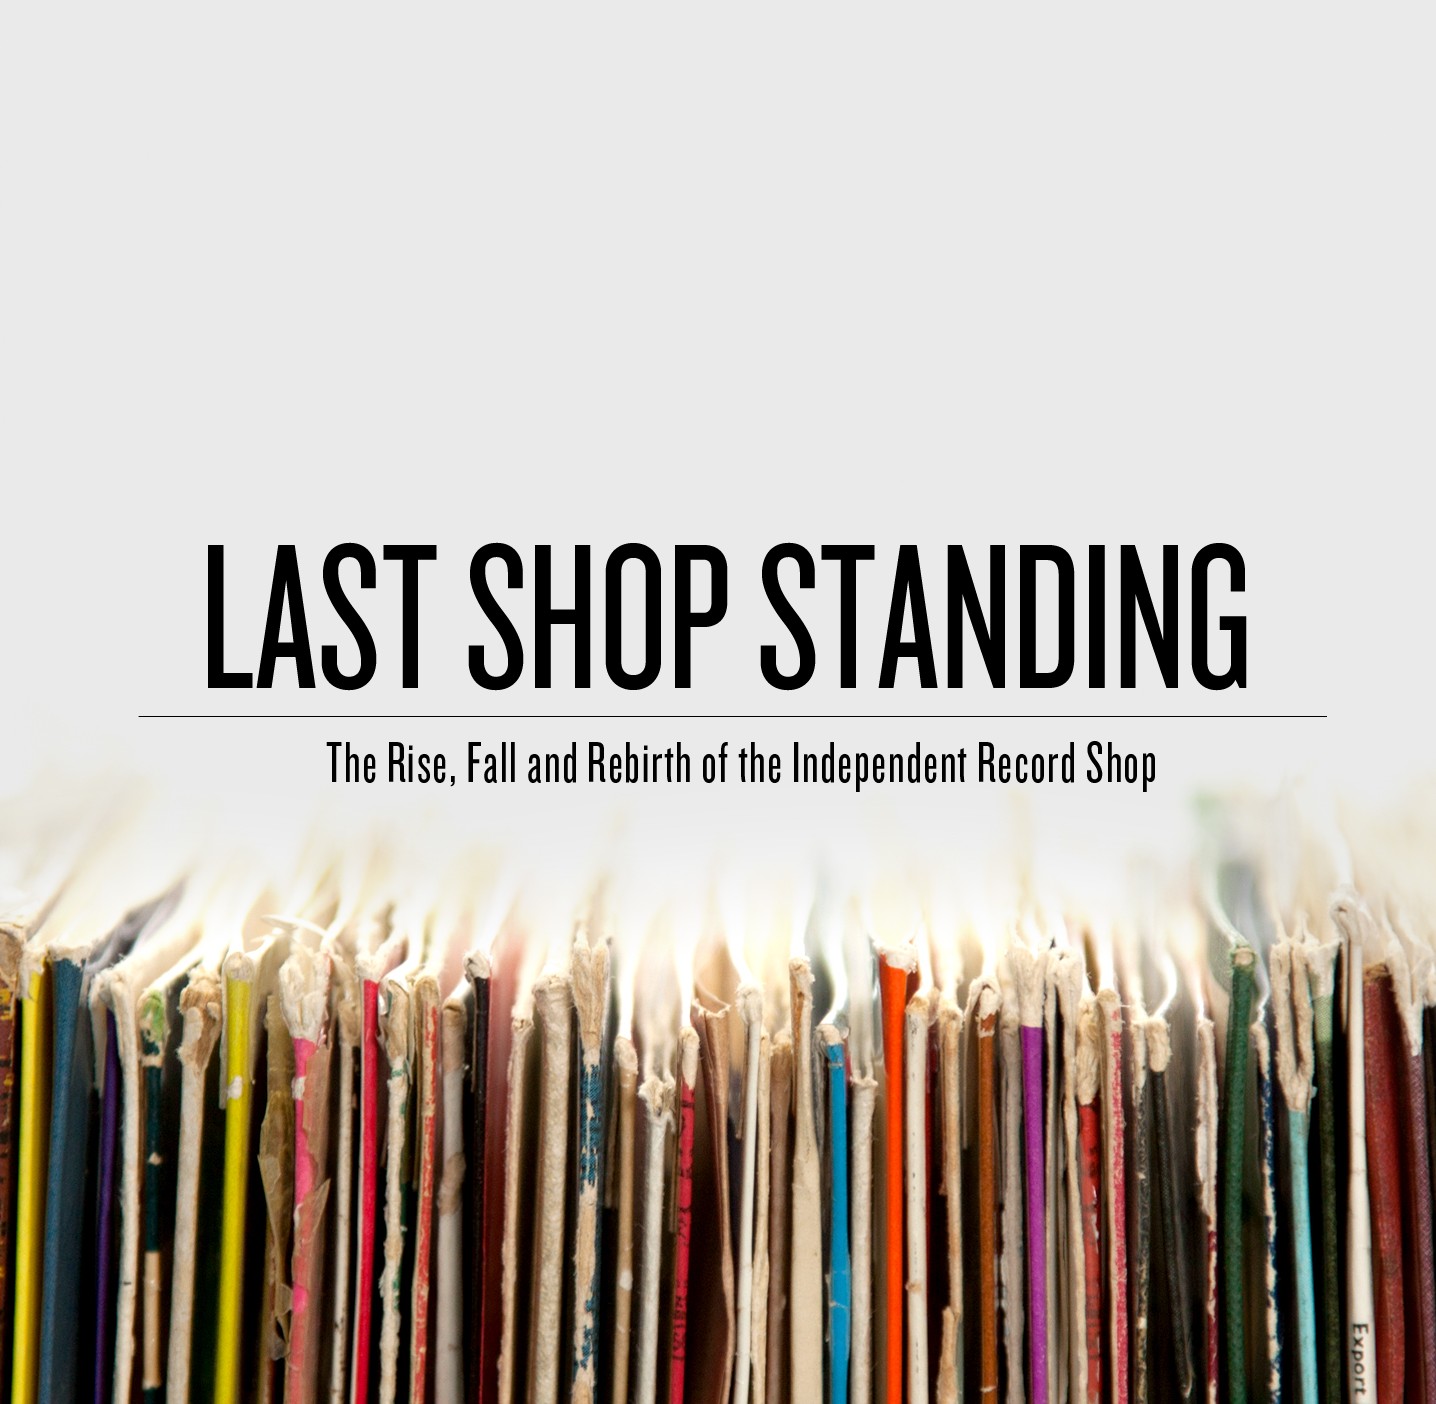 Your last shopping